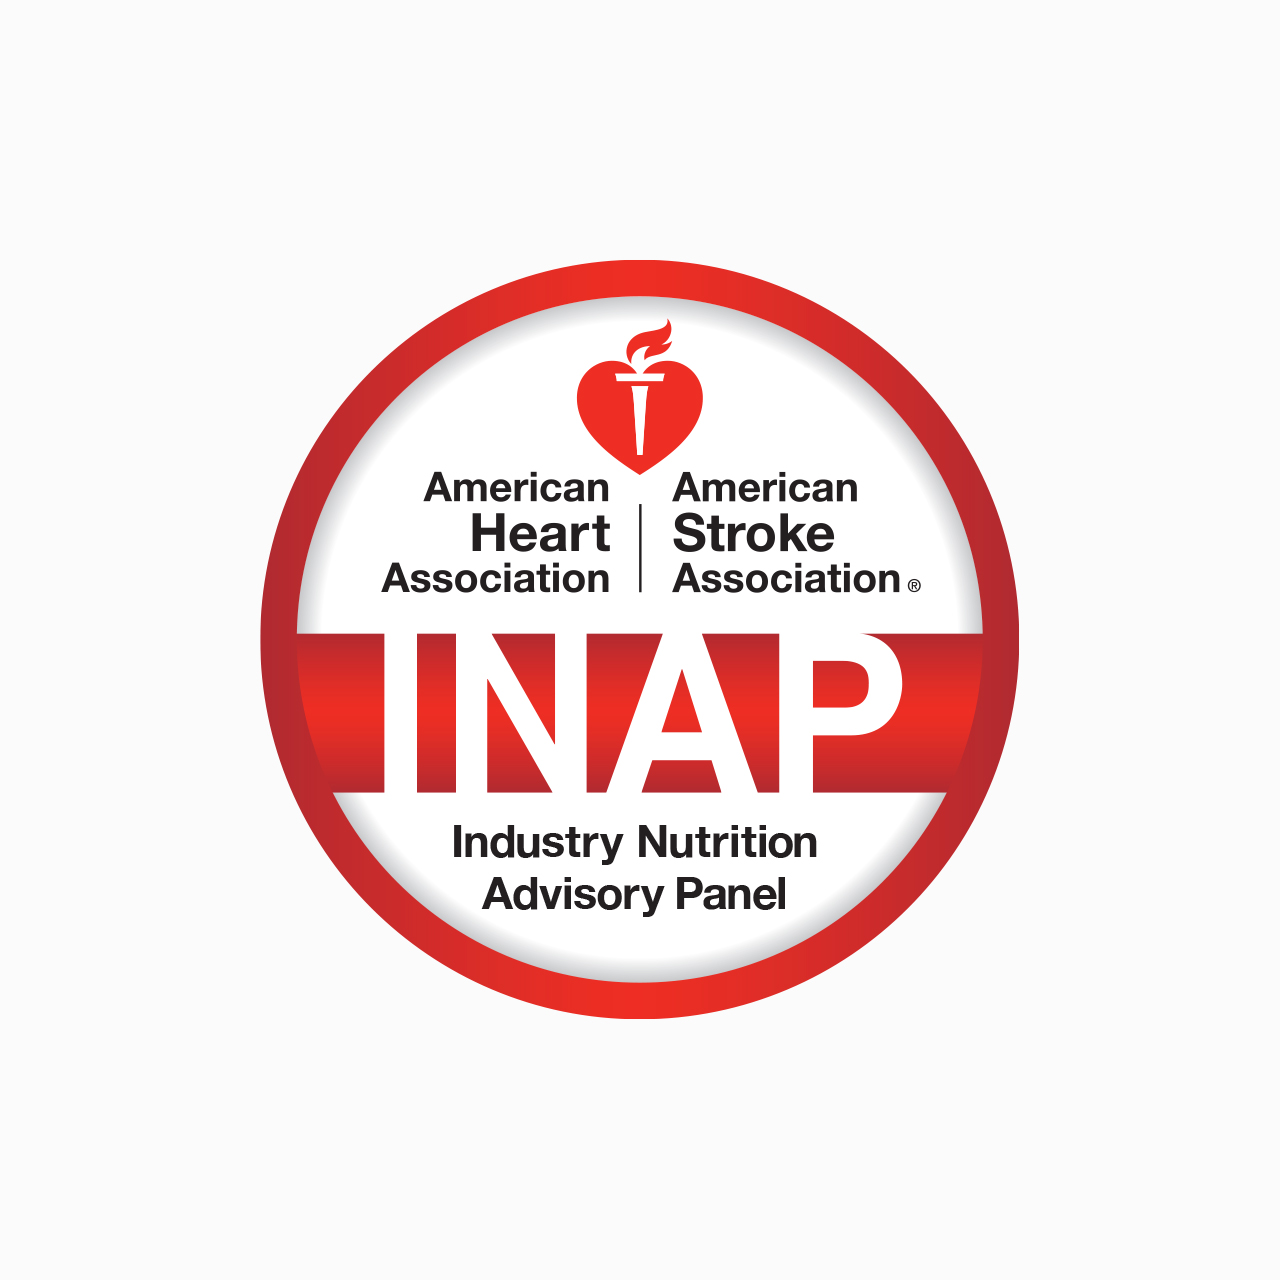 American Heart Association's logo design for INAP, Industry Nutrition Advisory Panel